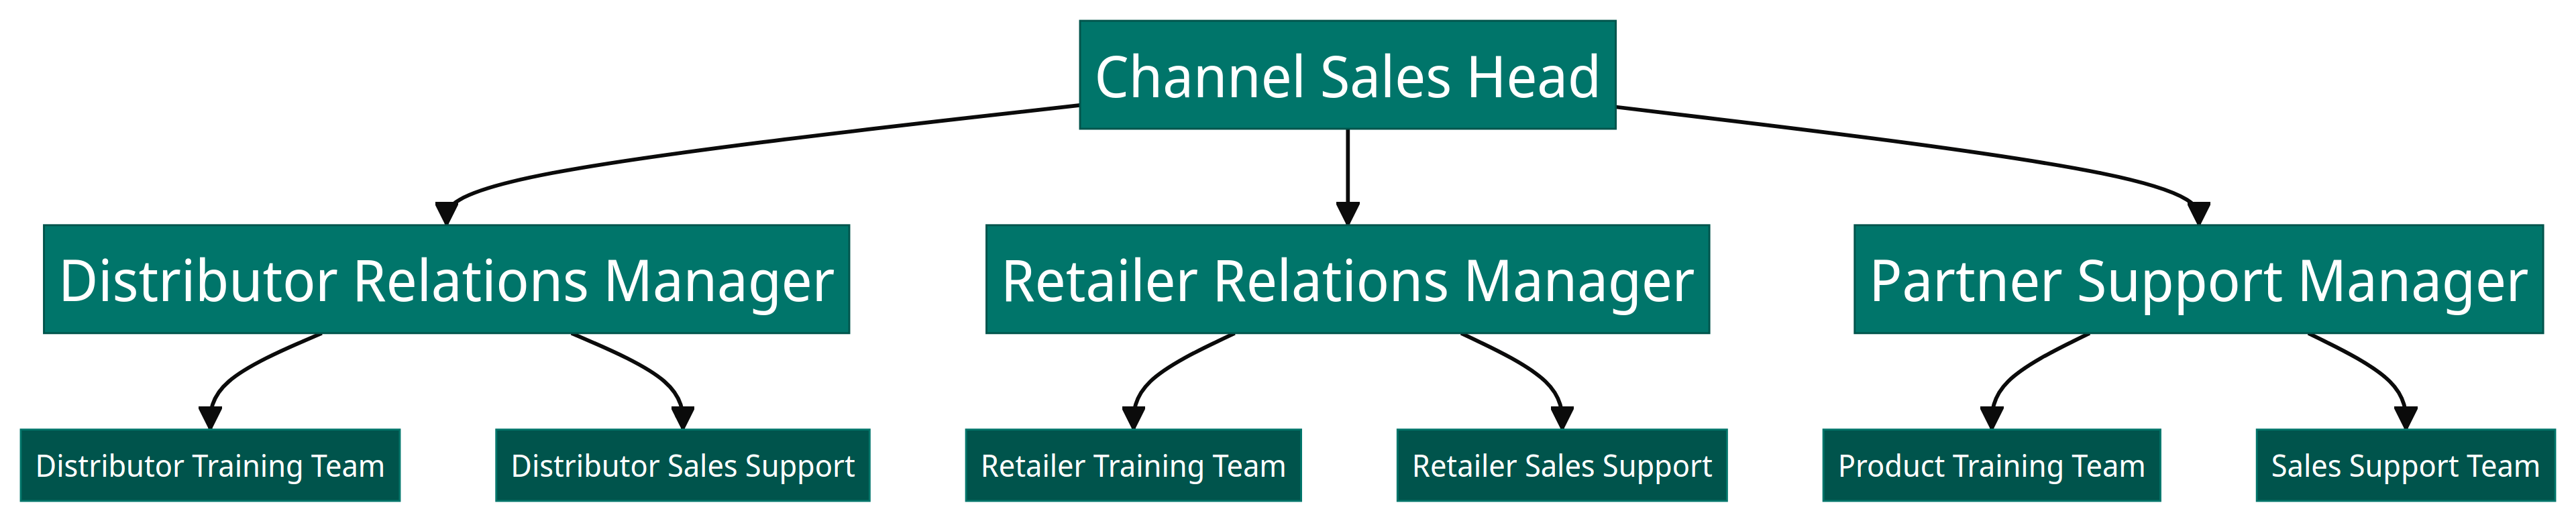 Channel sales team structure